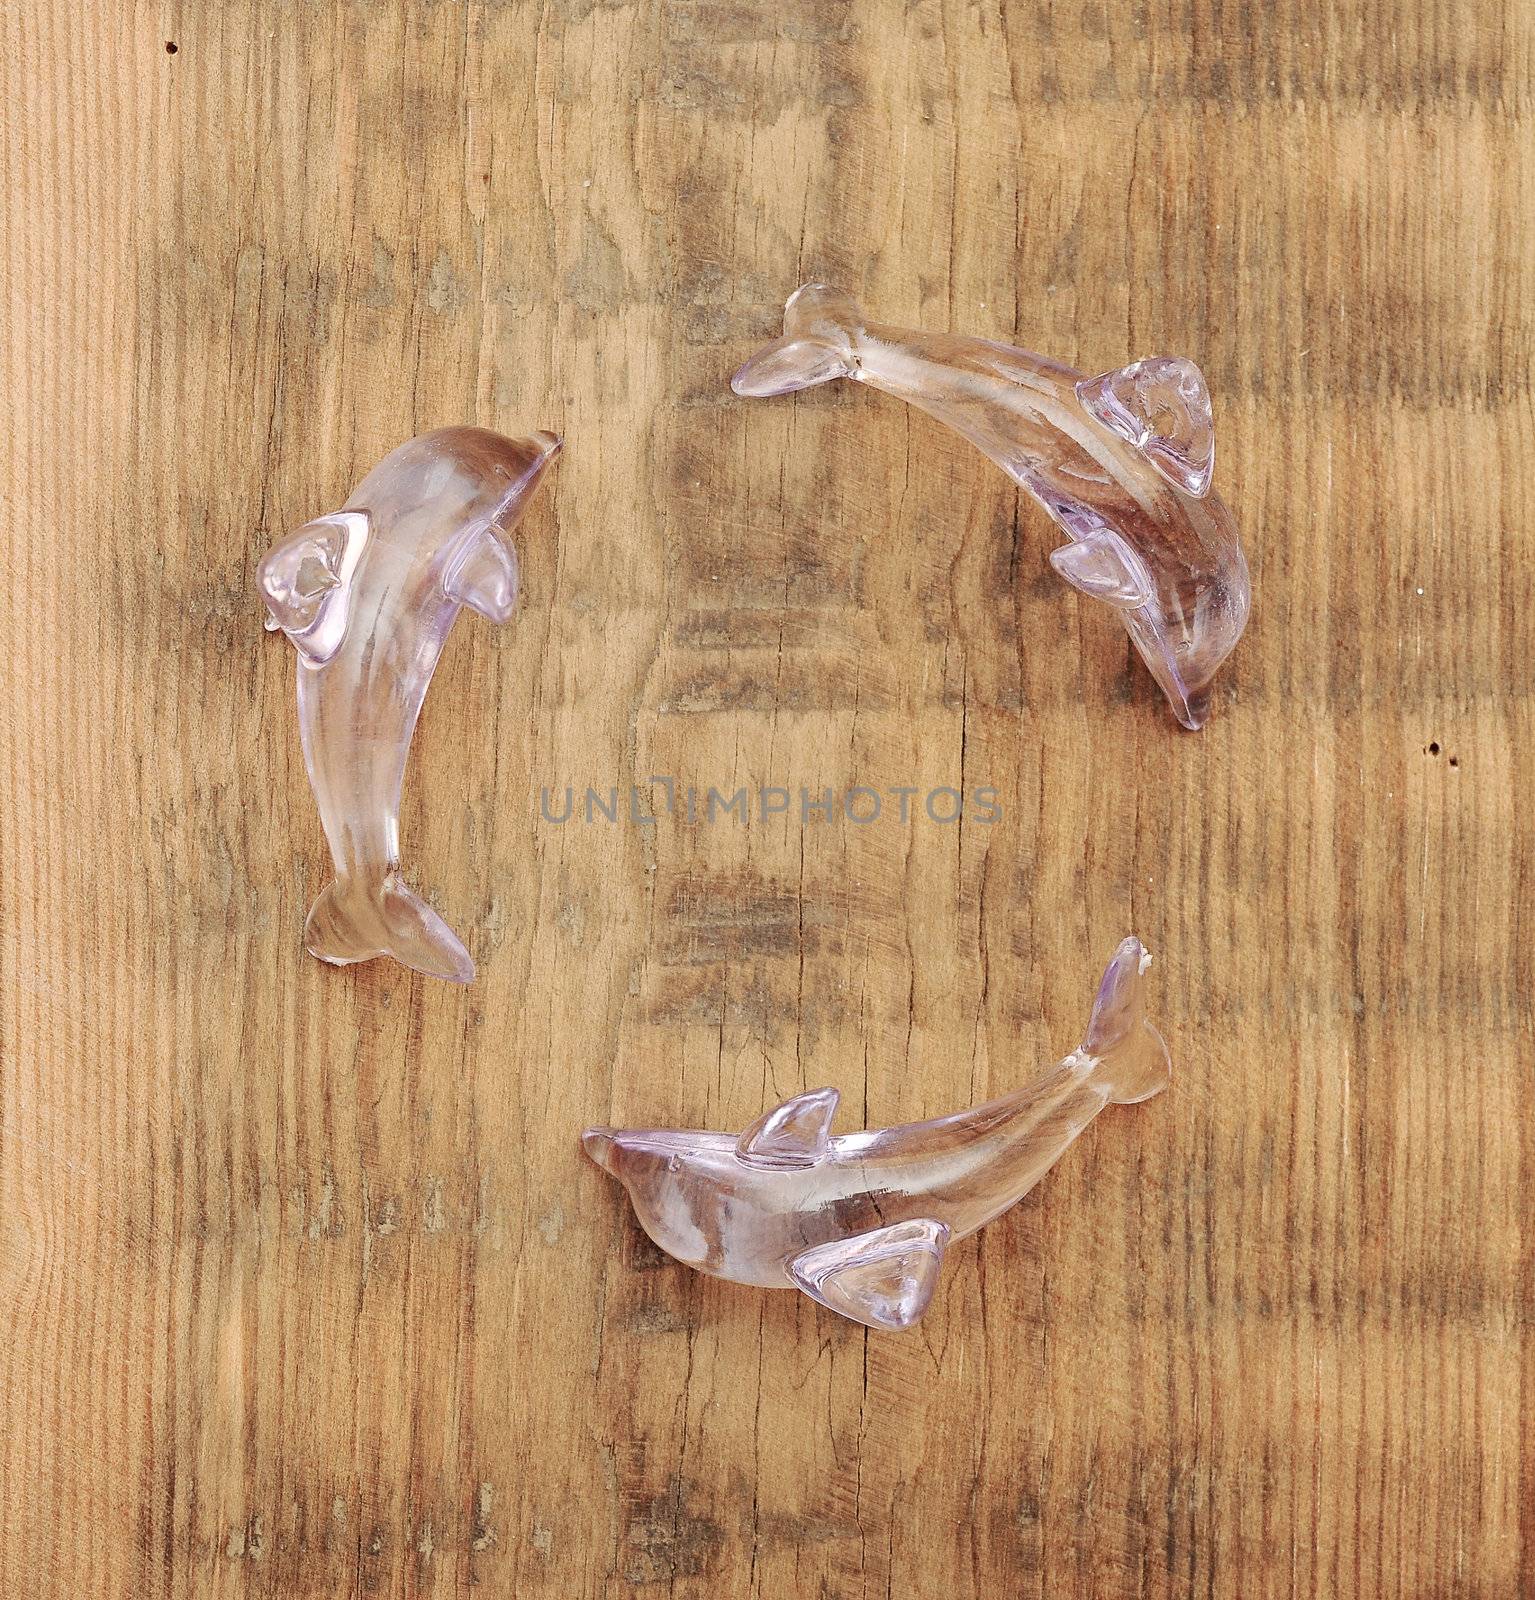 recycling symbol made crystal transparent dolphins sculpture wit by inxti